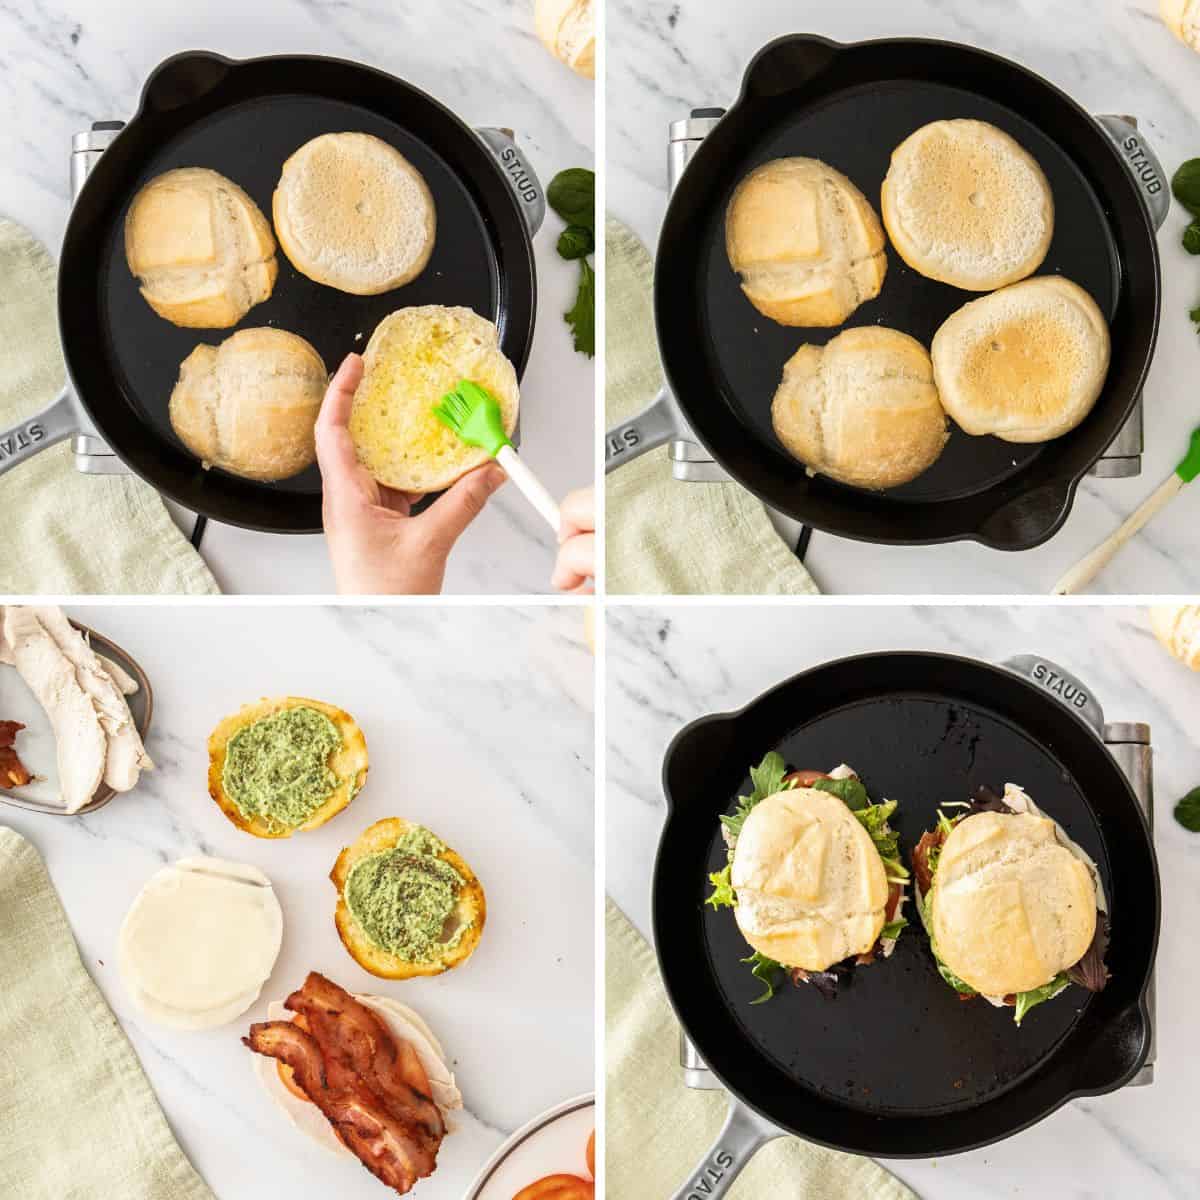 4 photos showing how to use a cast iron skillet to make a toasted sandwich.